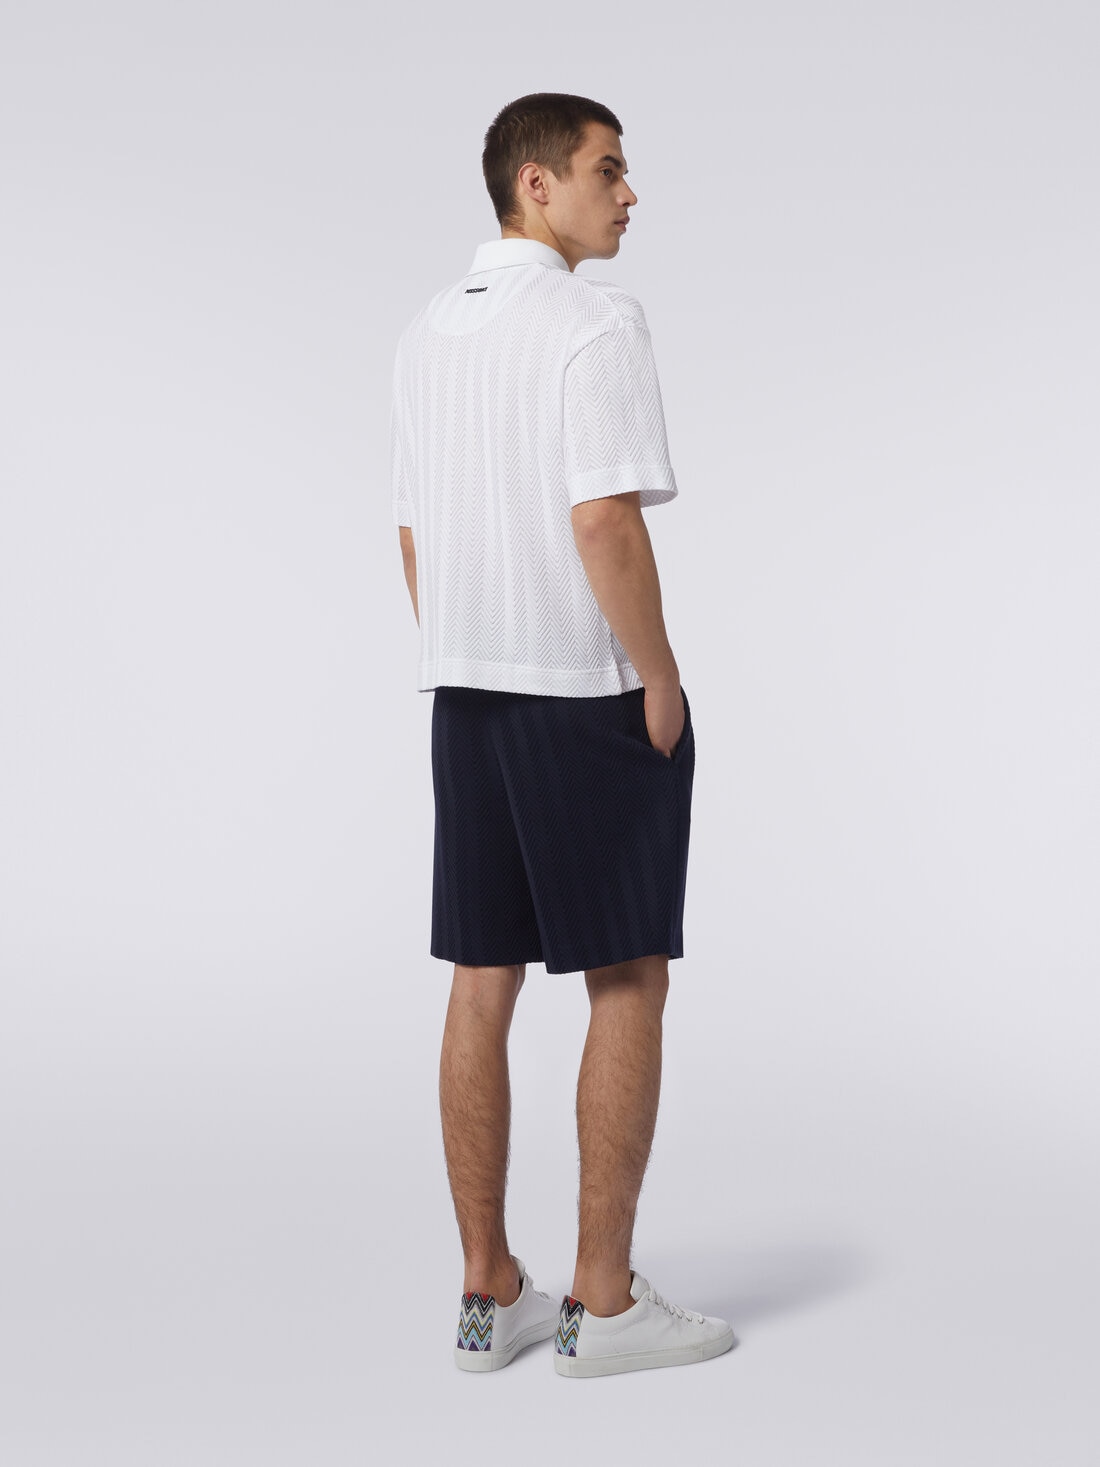 Short-sleeved polo shirt in chevron viscose and cotton, White  - US24S203BR00JC10601 - 3